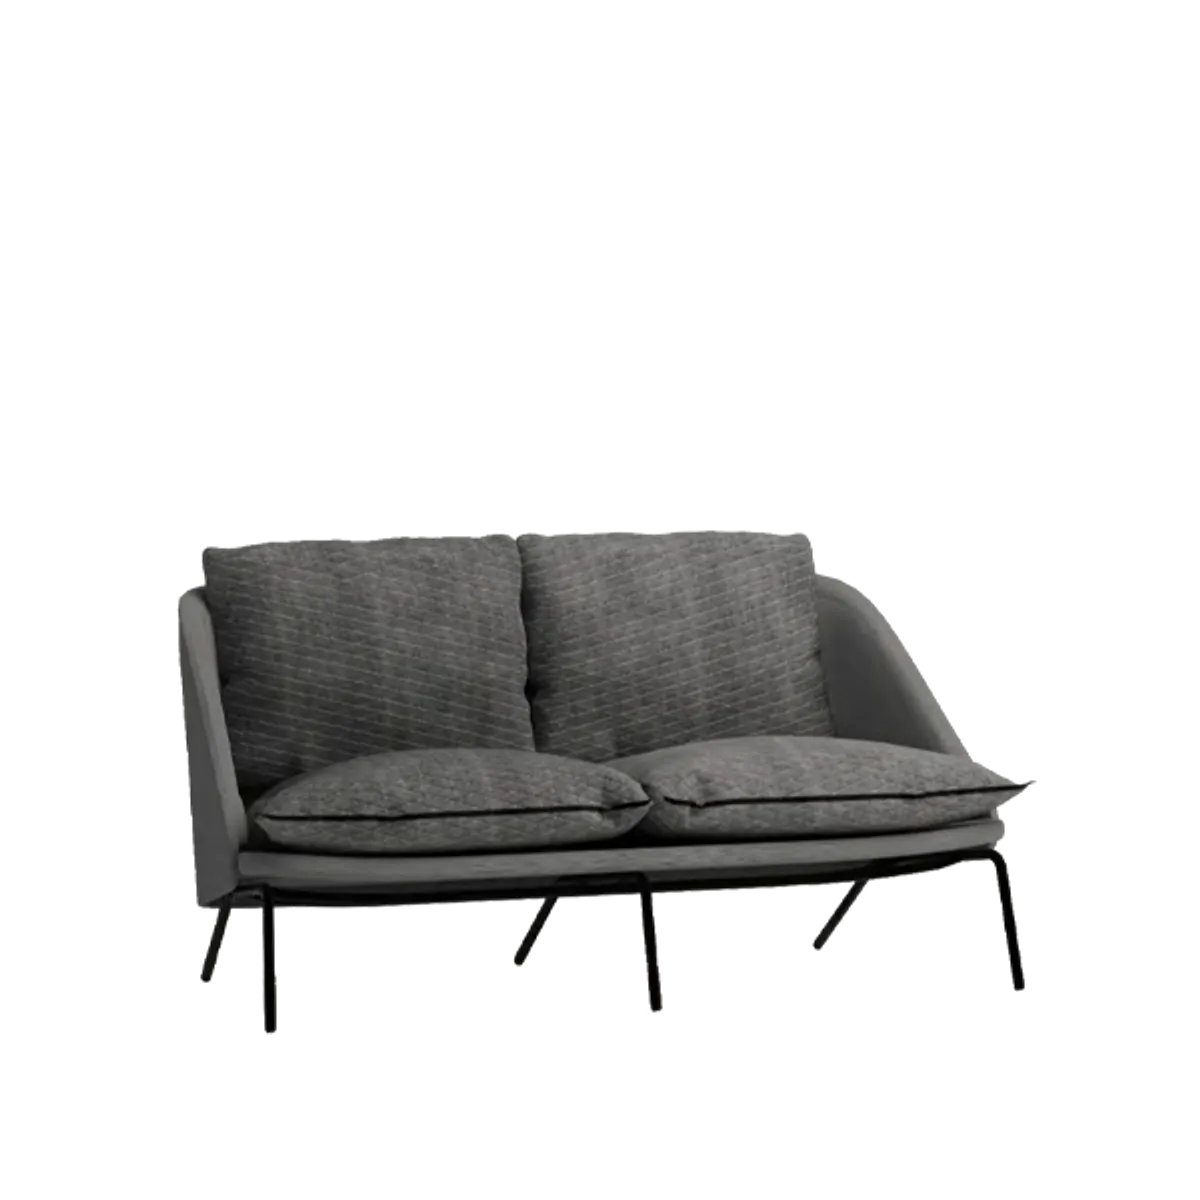 Dulcie sofa 2 Inside Out Contracts